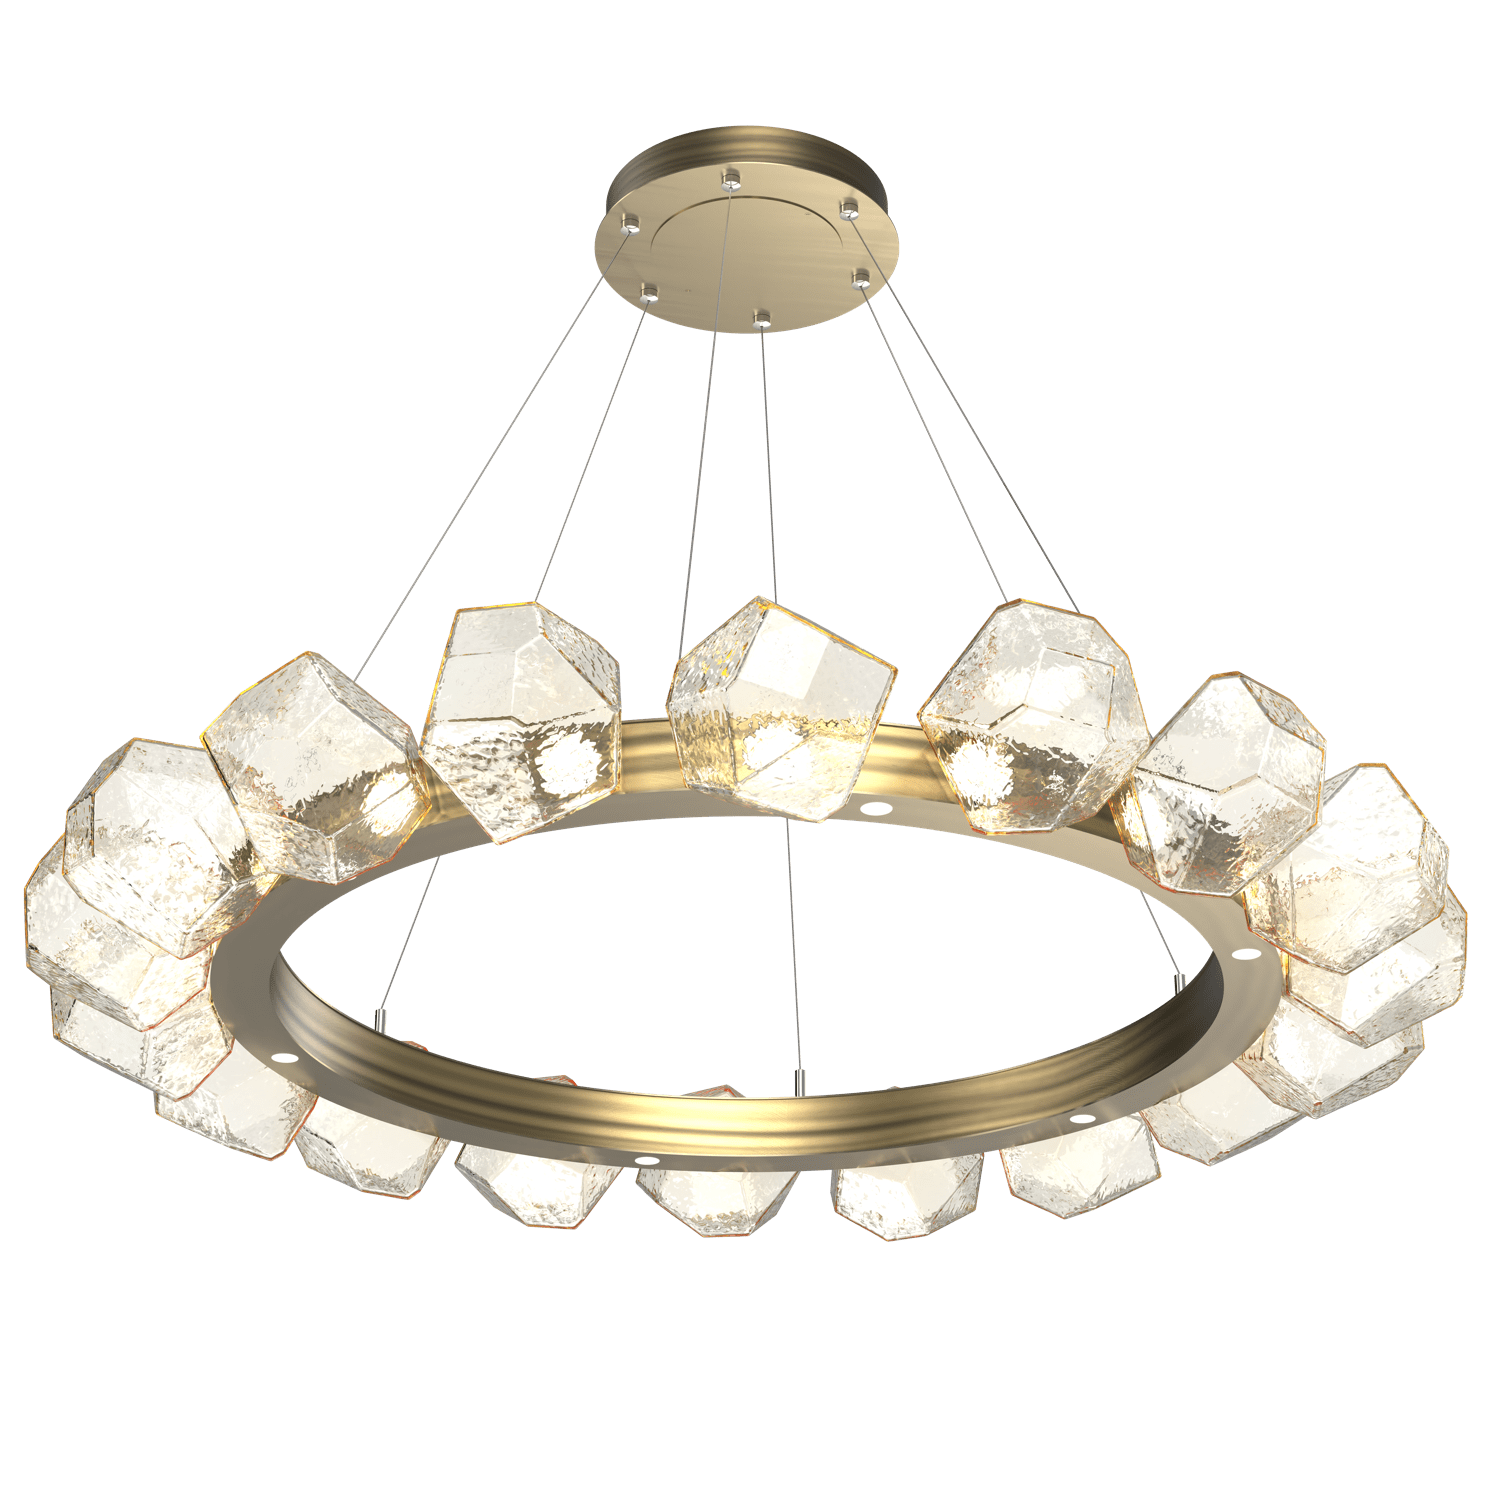 CHB0039-48-HB-A-Hammerton-Studio-Gem-48-inch-radial-ring-chandelier-with-heritage-brass-finish-and-amber-blown-glass-shades-and-LED-lamping